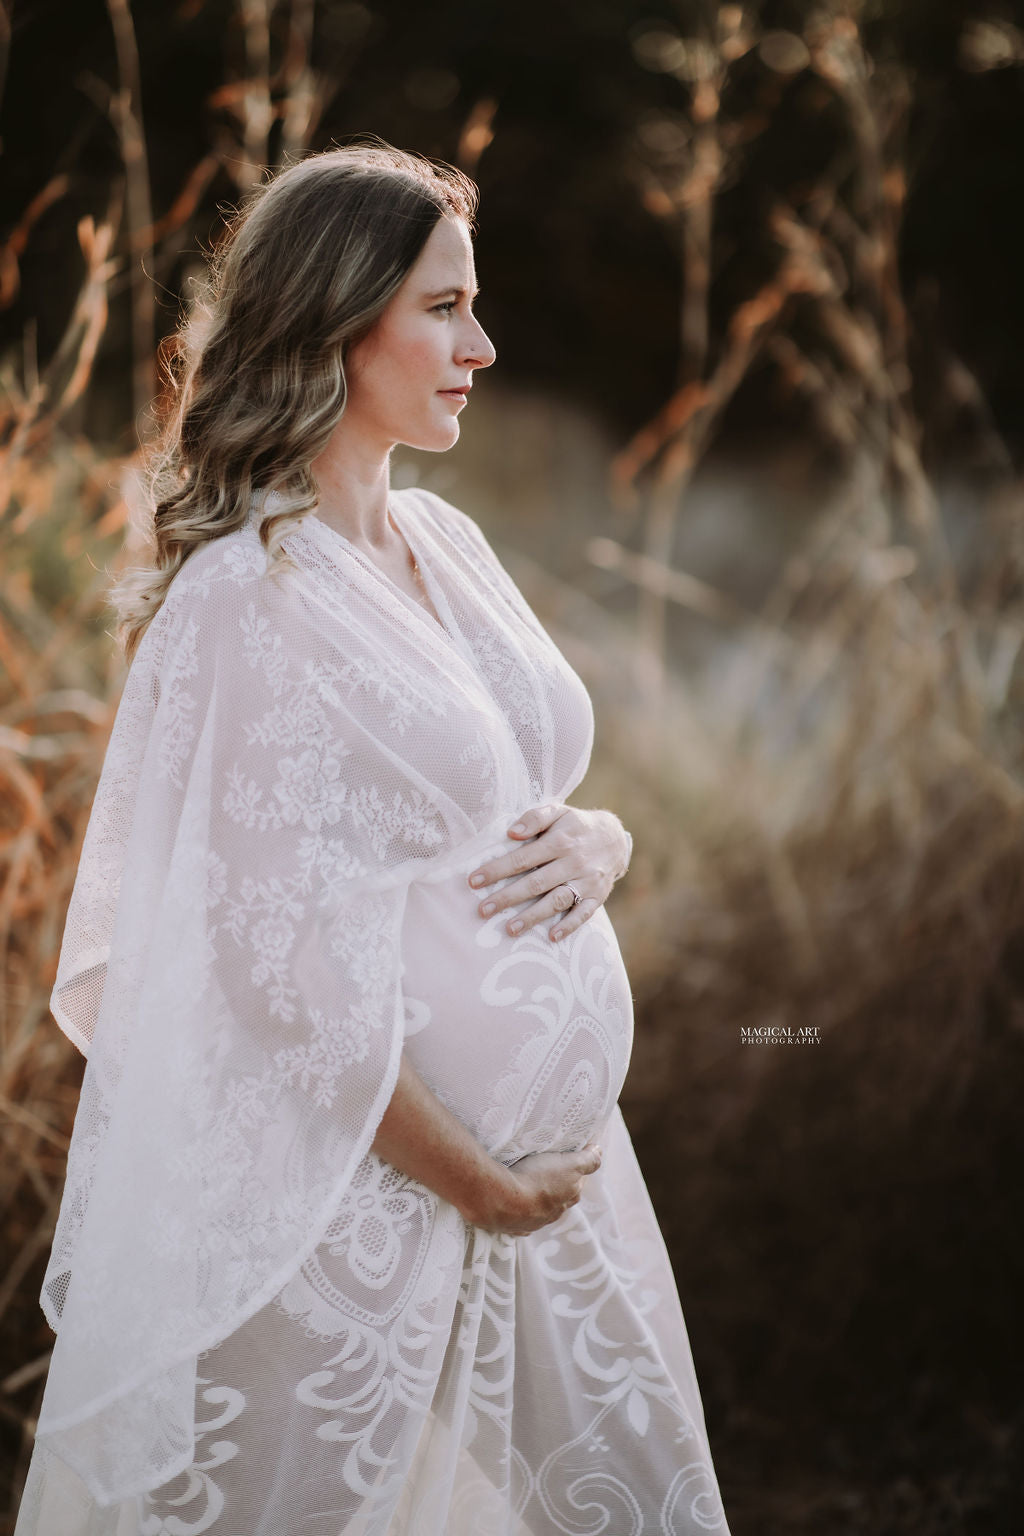 Maternity Photoshoot Dresses - White Lace Vneck Gown - D&J Newborn and Maternity Props